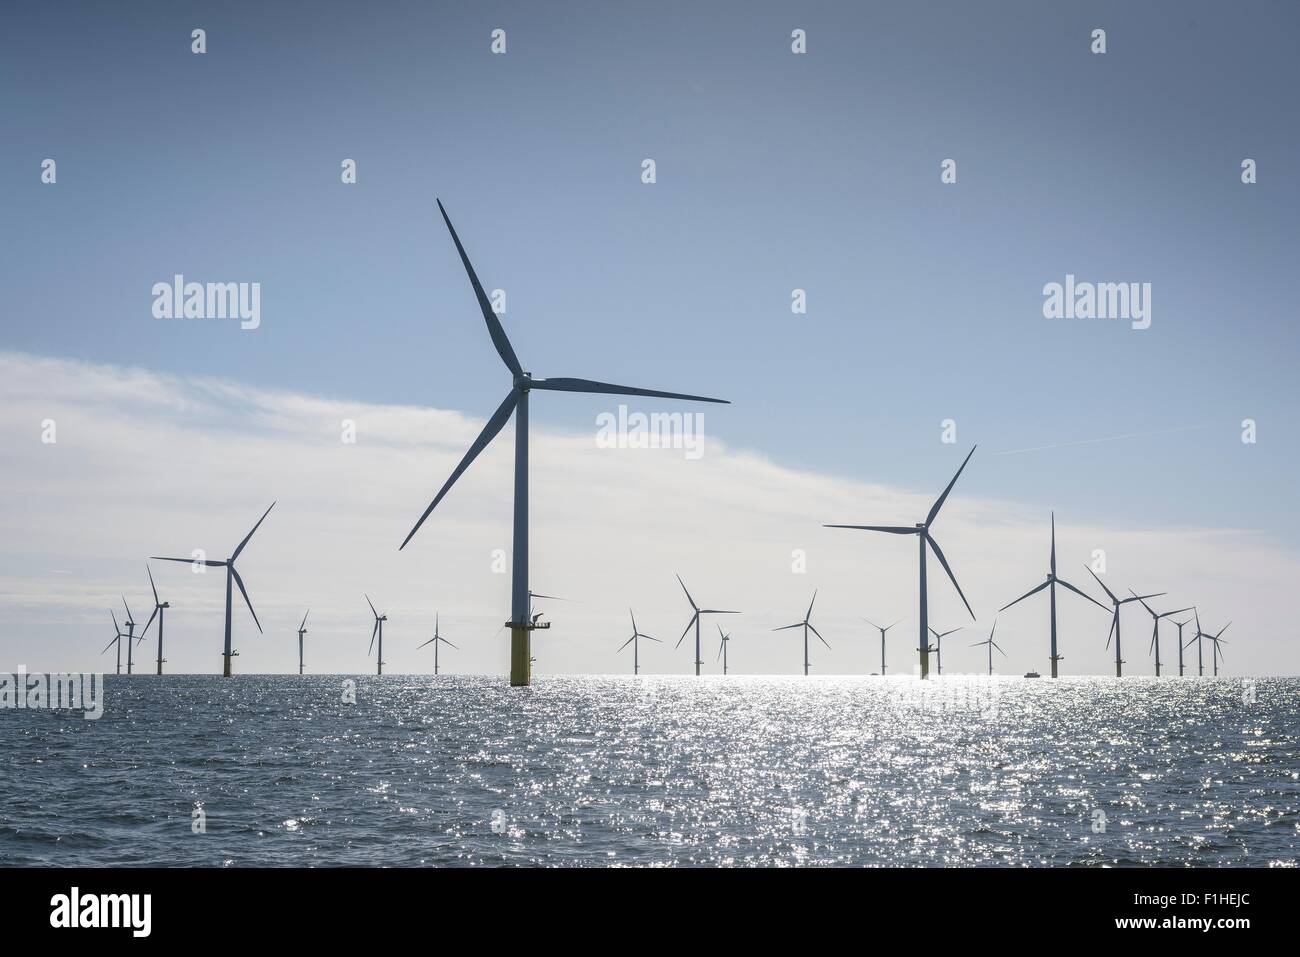 View of offshore windfarm from service boat at sea Stock Photo